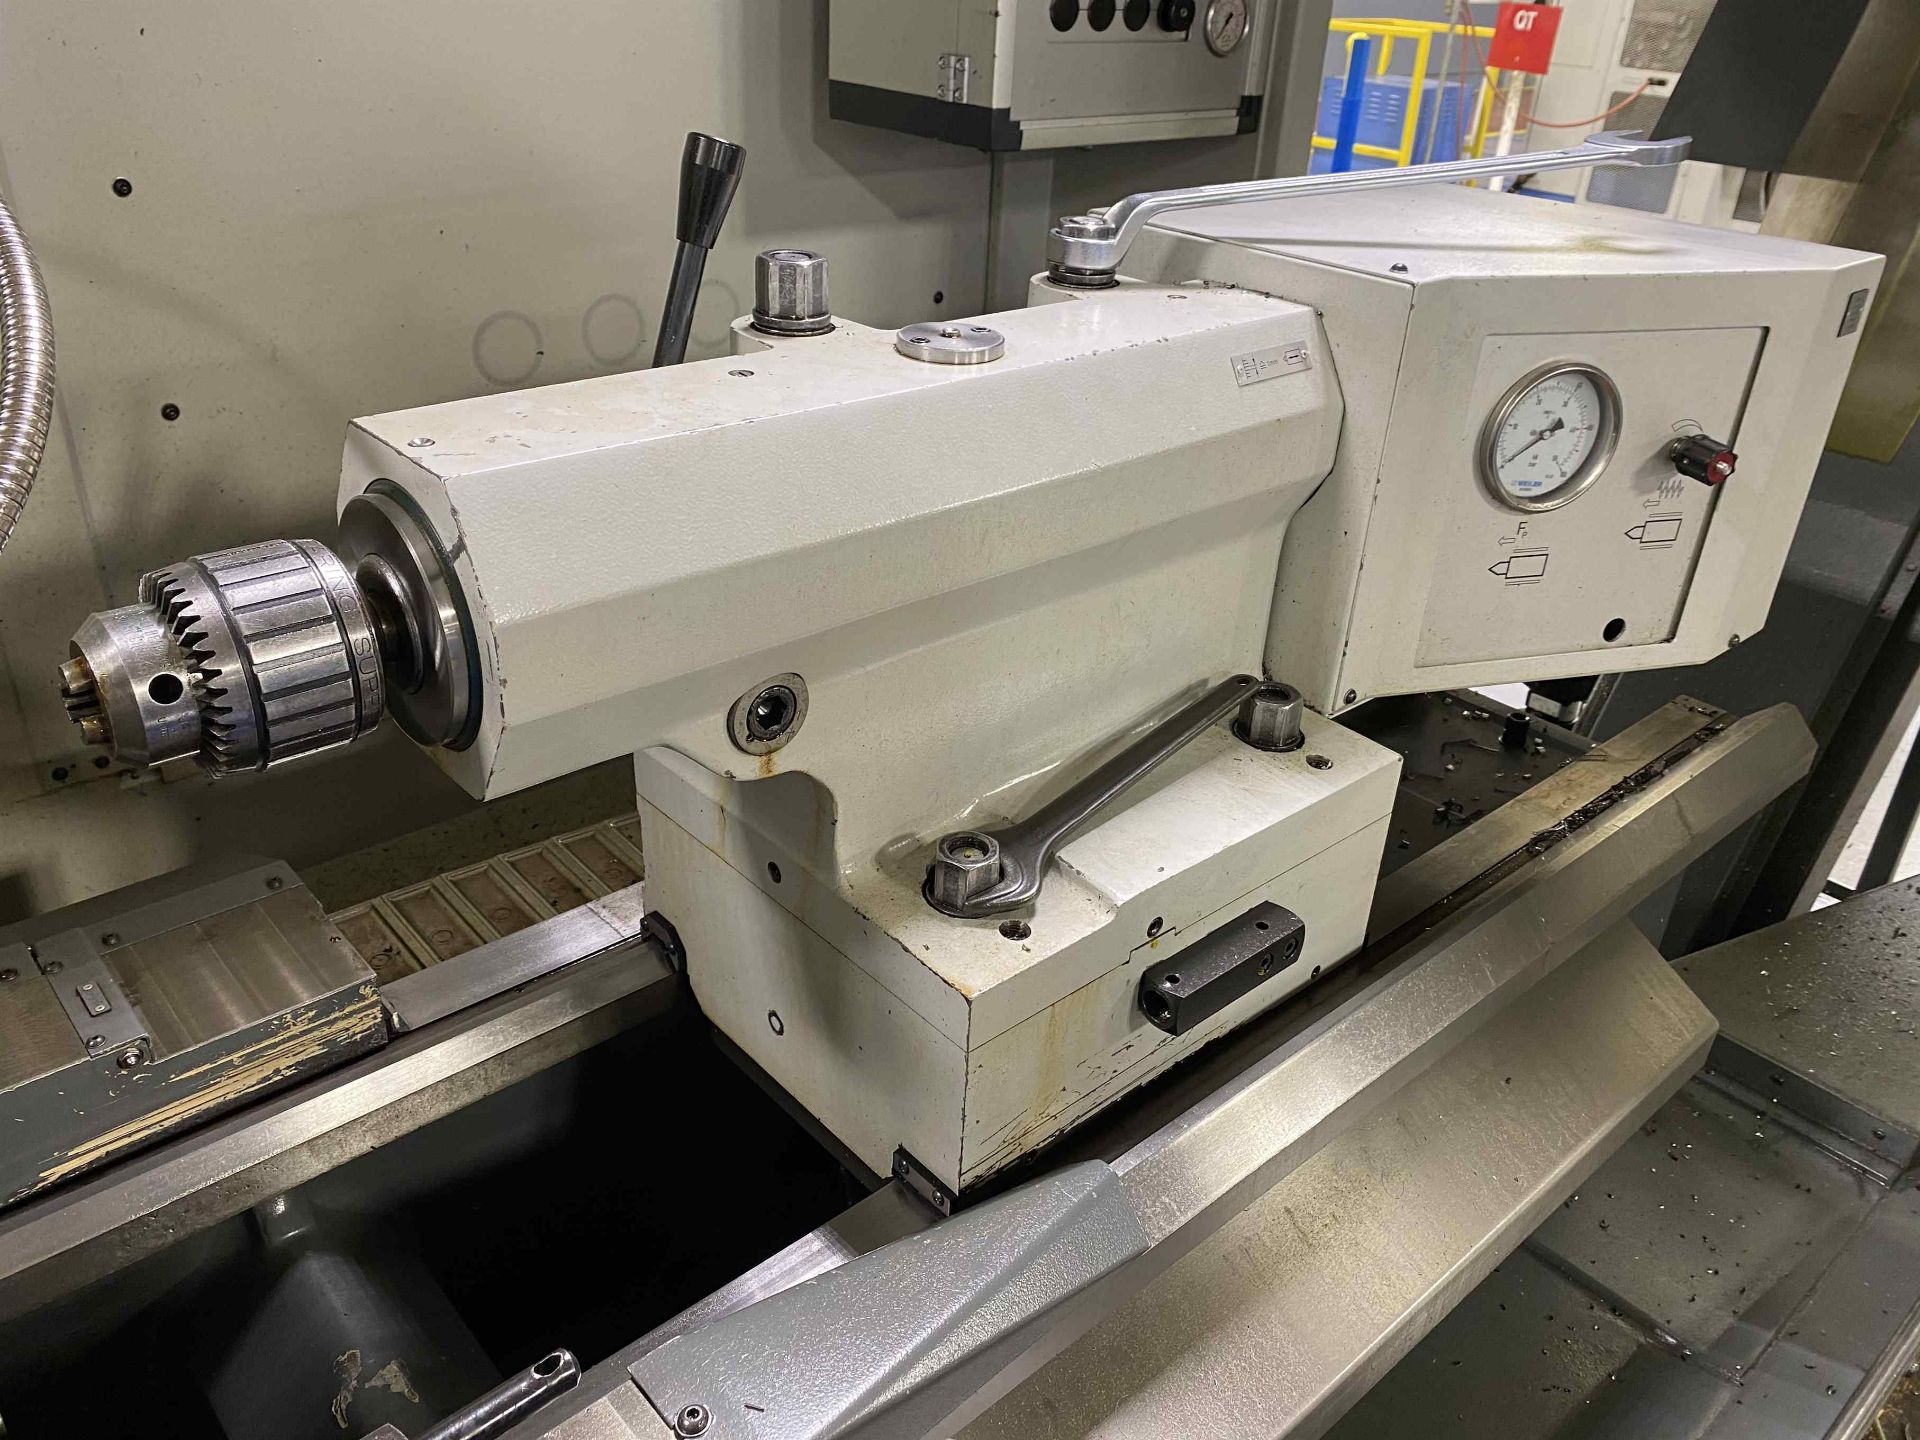 2015 WEILER E70 Cycle-Controlled Lathe, s/n KG01, w/ WEILER Control, (2) 21" 4-Jaw Chucks, 80" Cente - Image 6 of 9